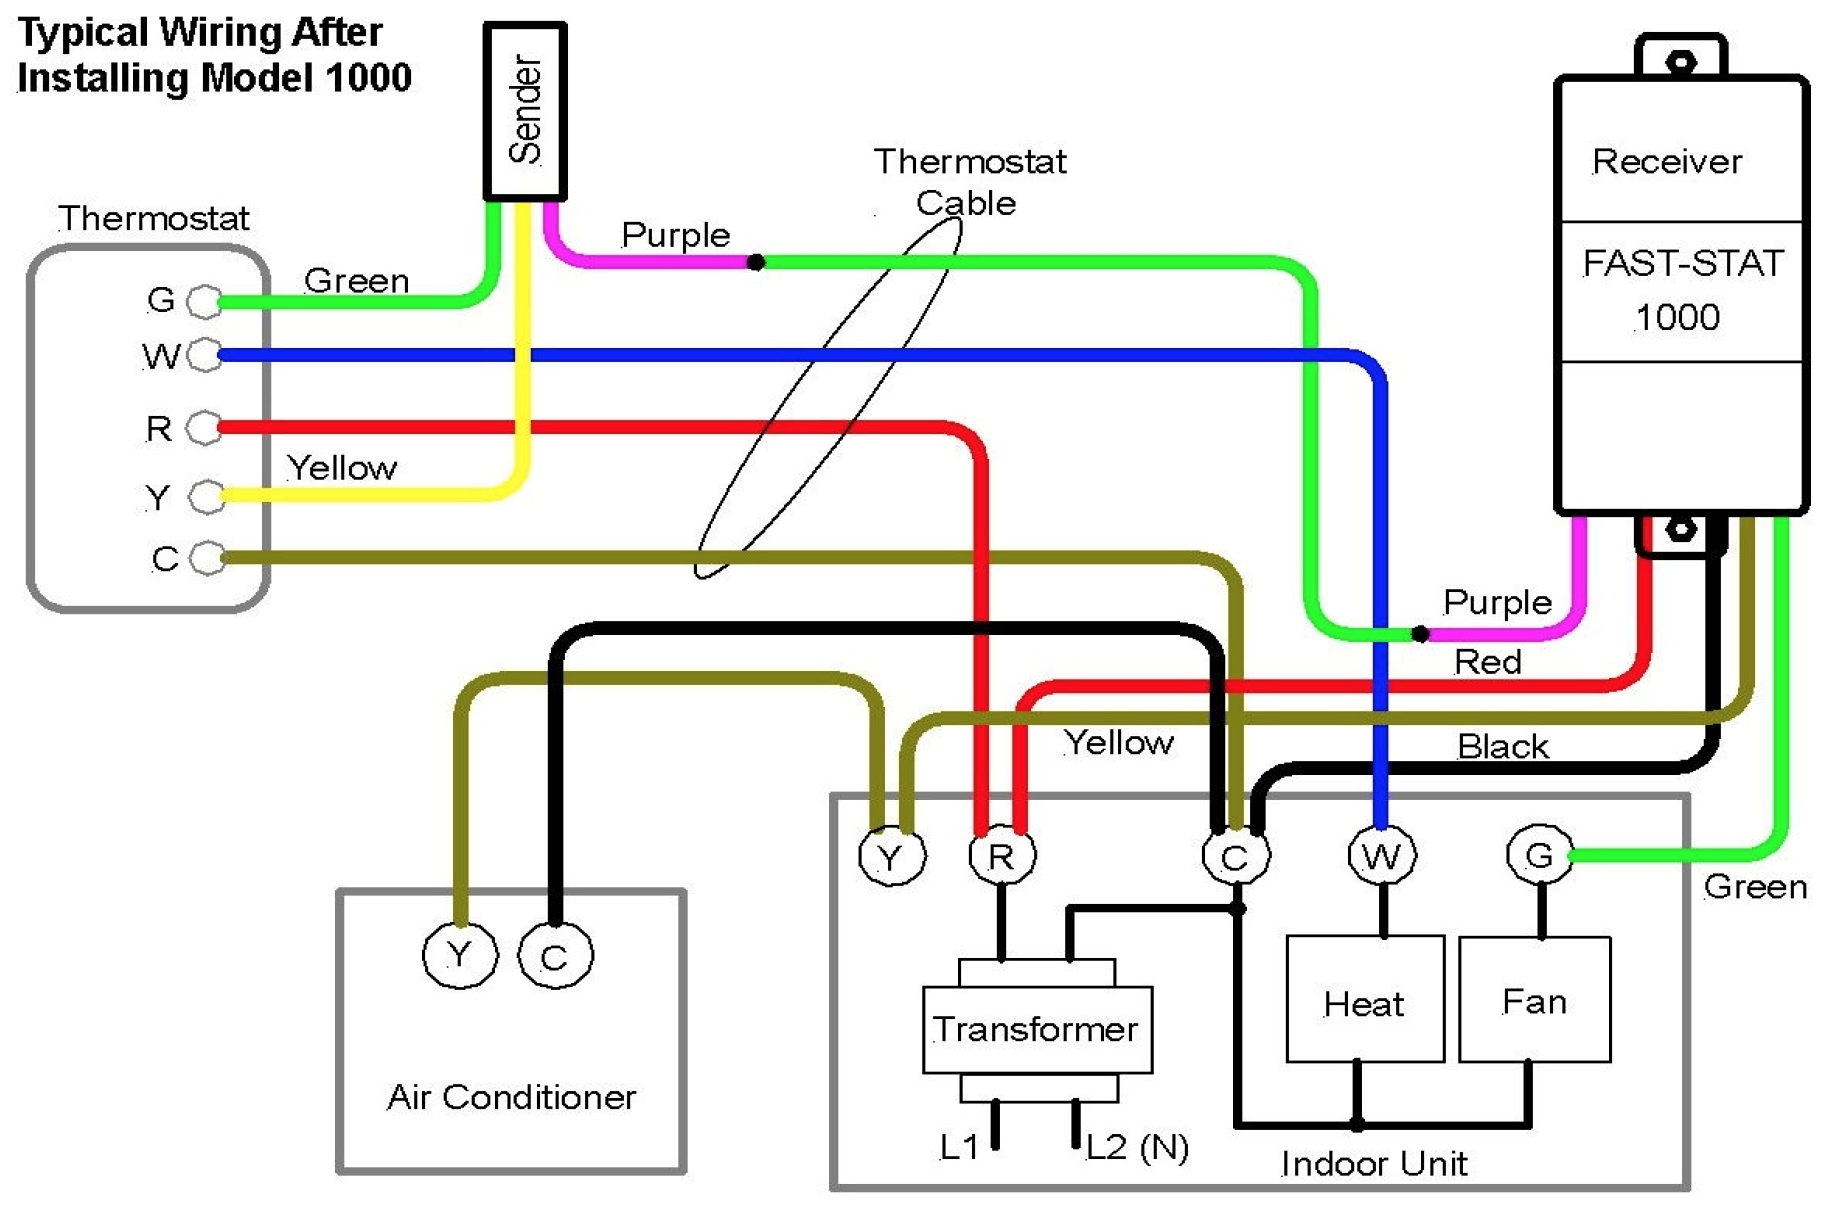 Cool Cat Ac Thermostat Wiring Diagram